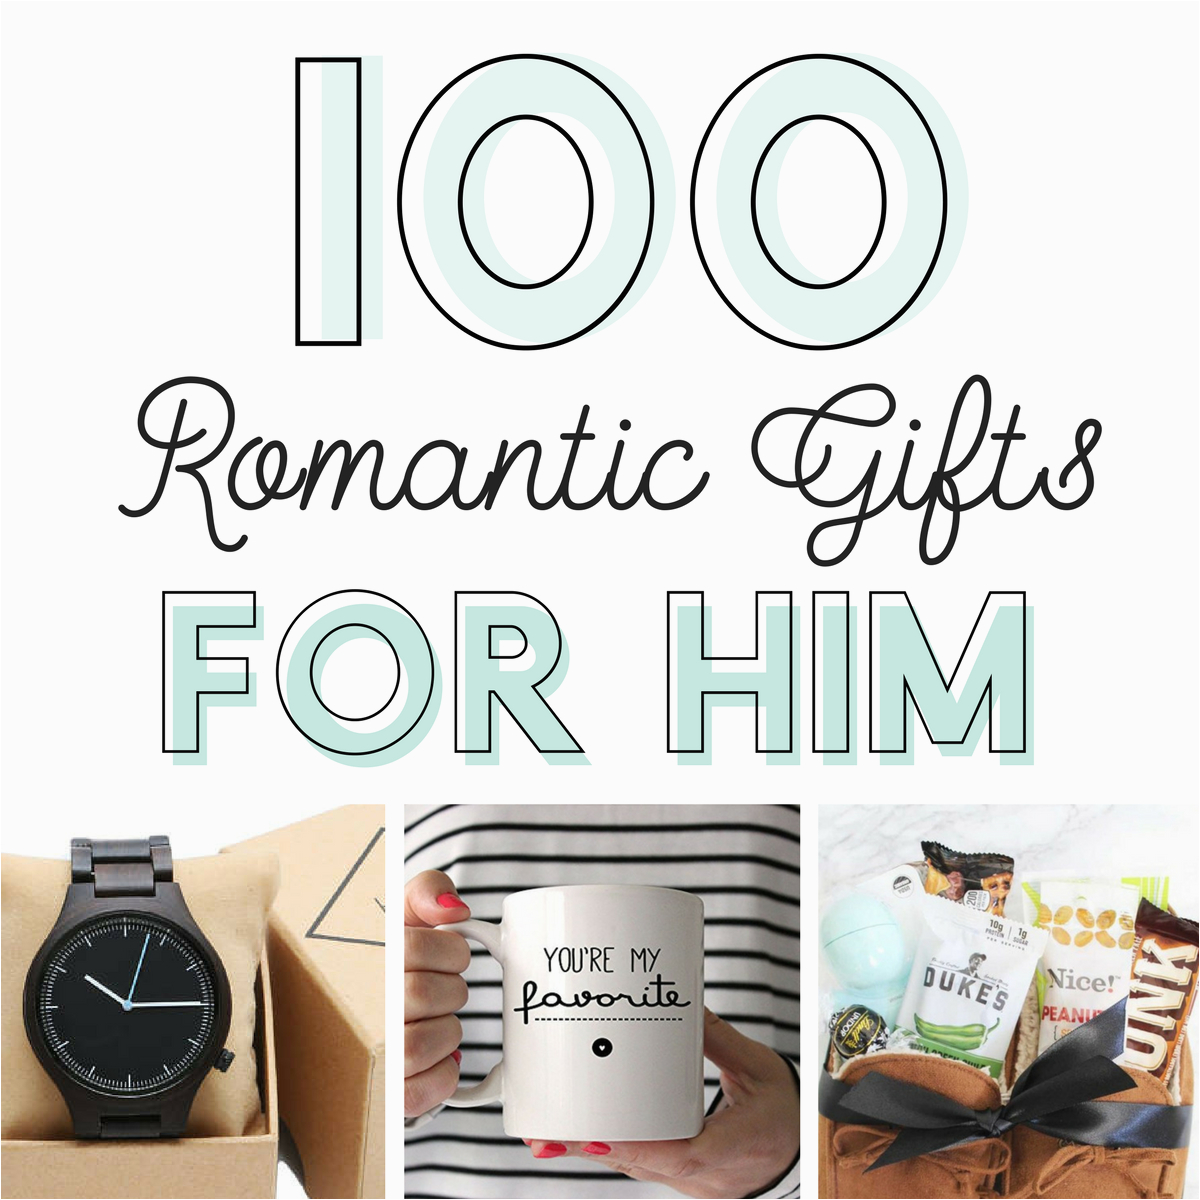 Small Birthday Gifts for Husband 100 Romantic Gifts for Him From the Dating Divas